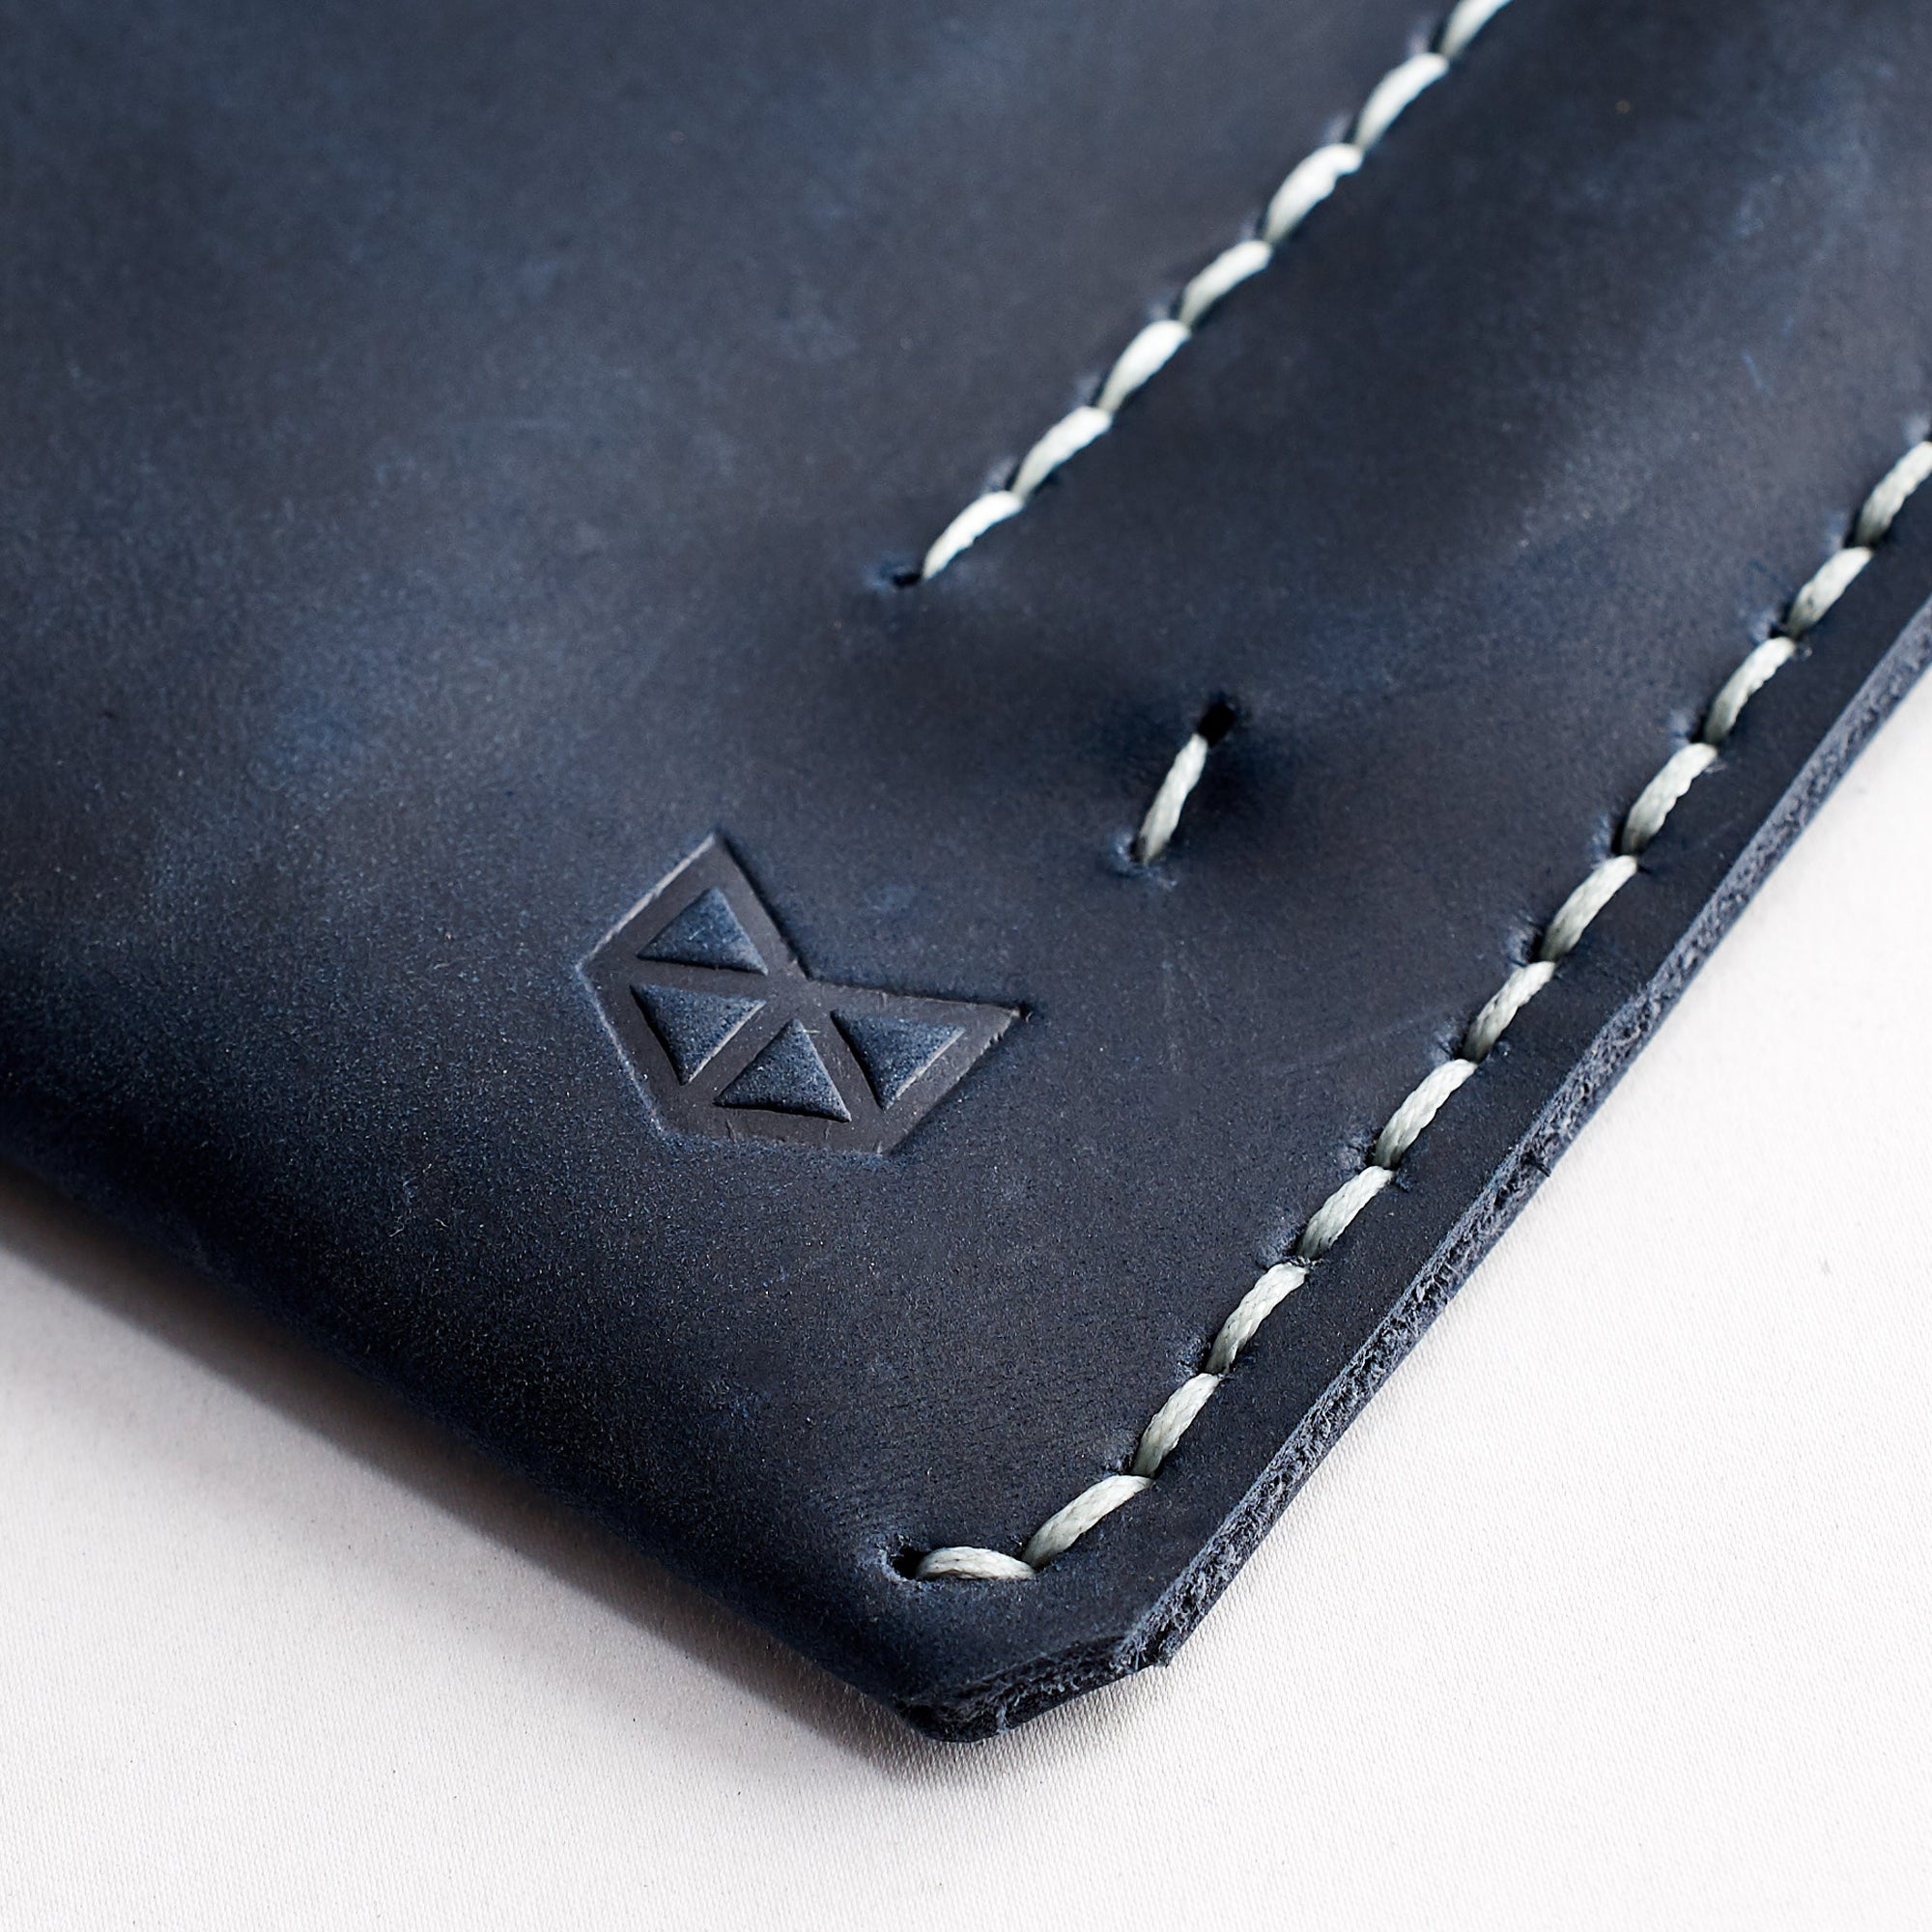 Hand Stitched. iPad Sleeve. iPad Leather Case Navy With Apple Pencil Holder by Capra Leather